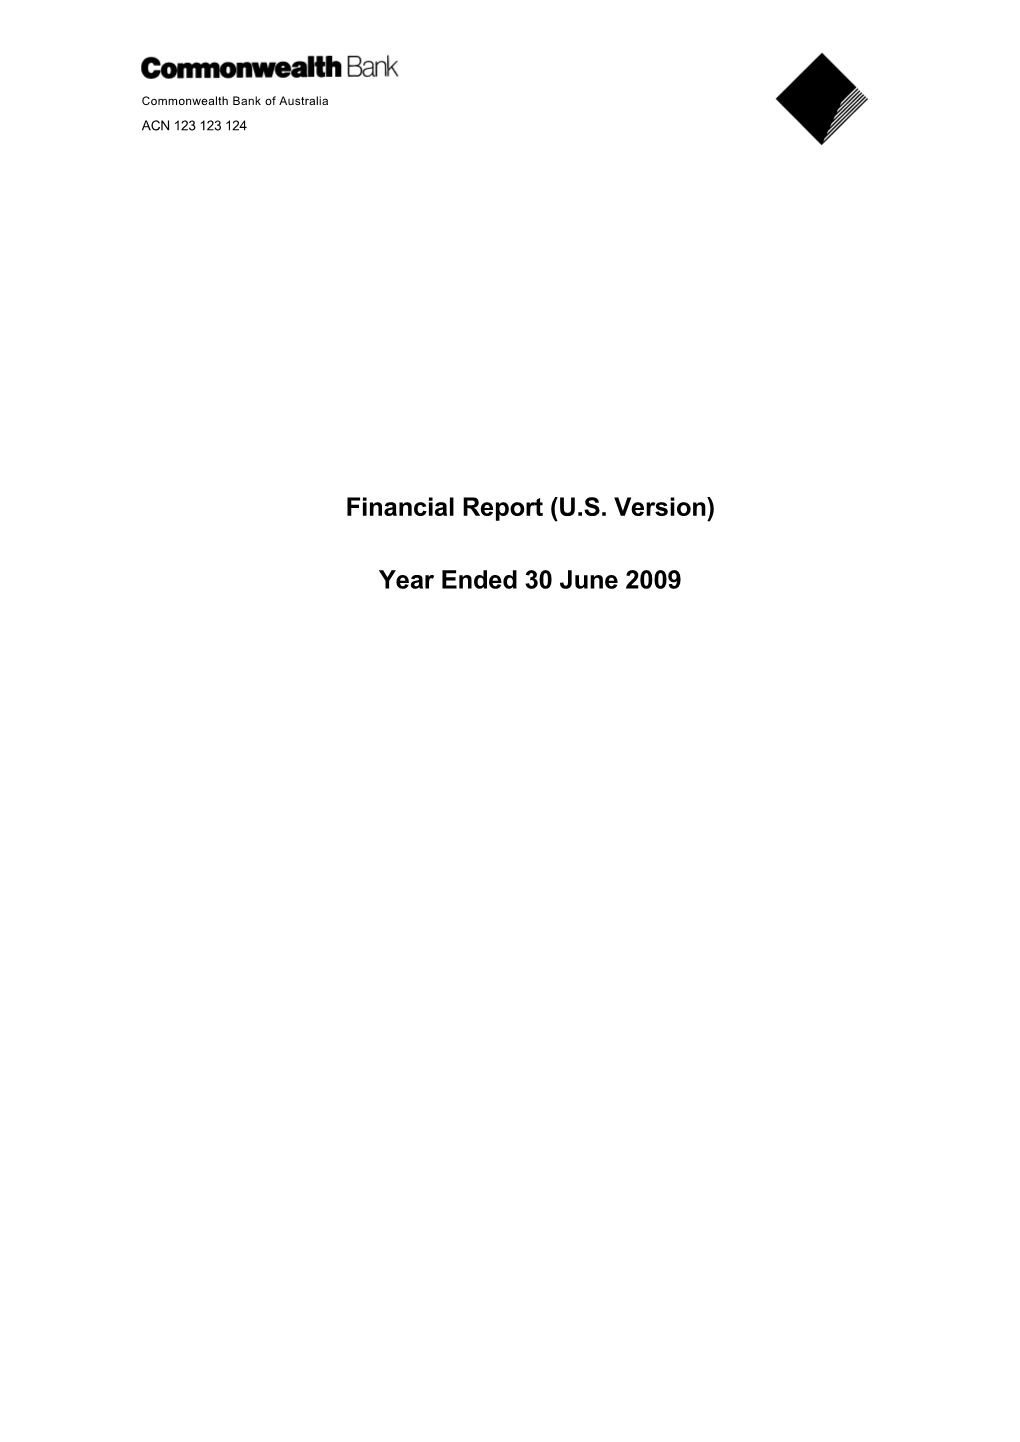 Financial Report (US Version) Year Ended 30 June 2009